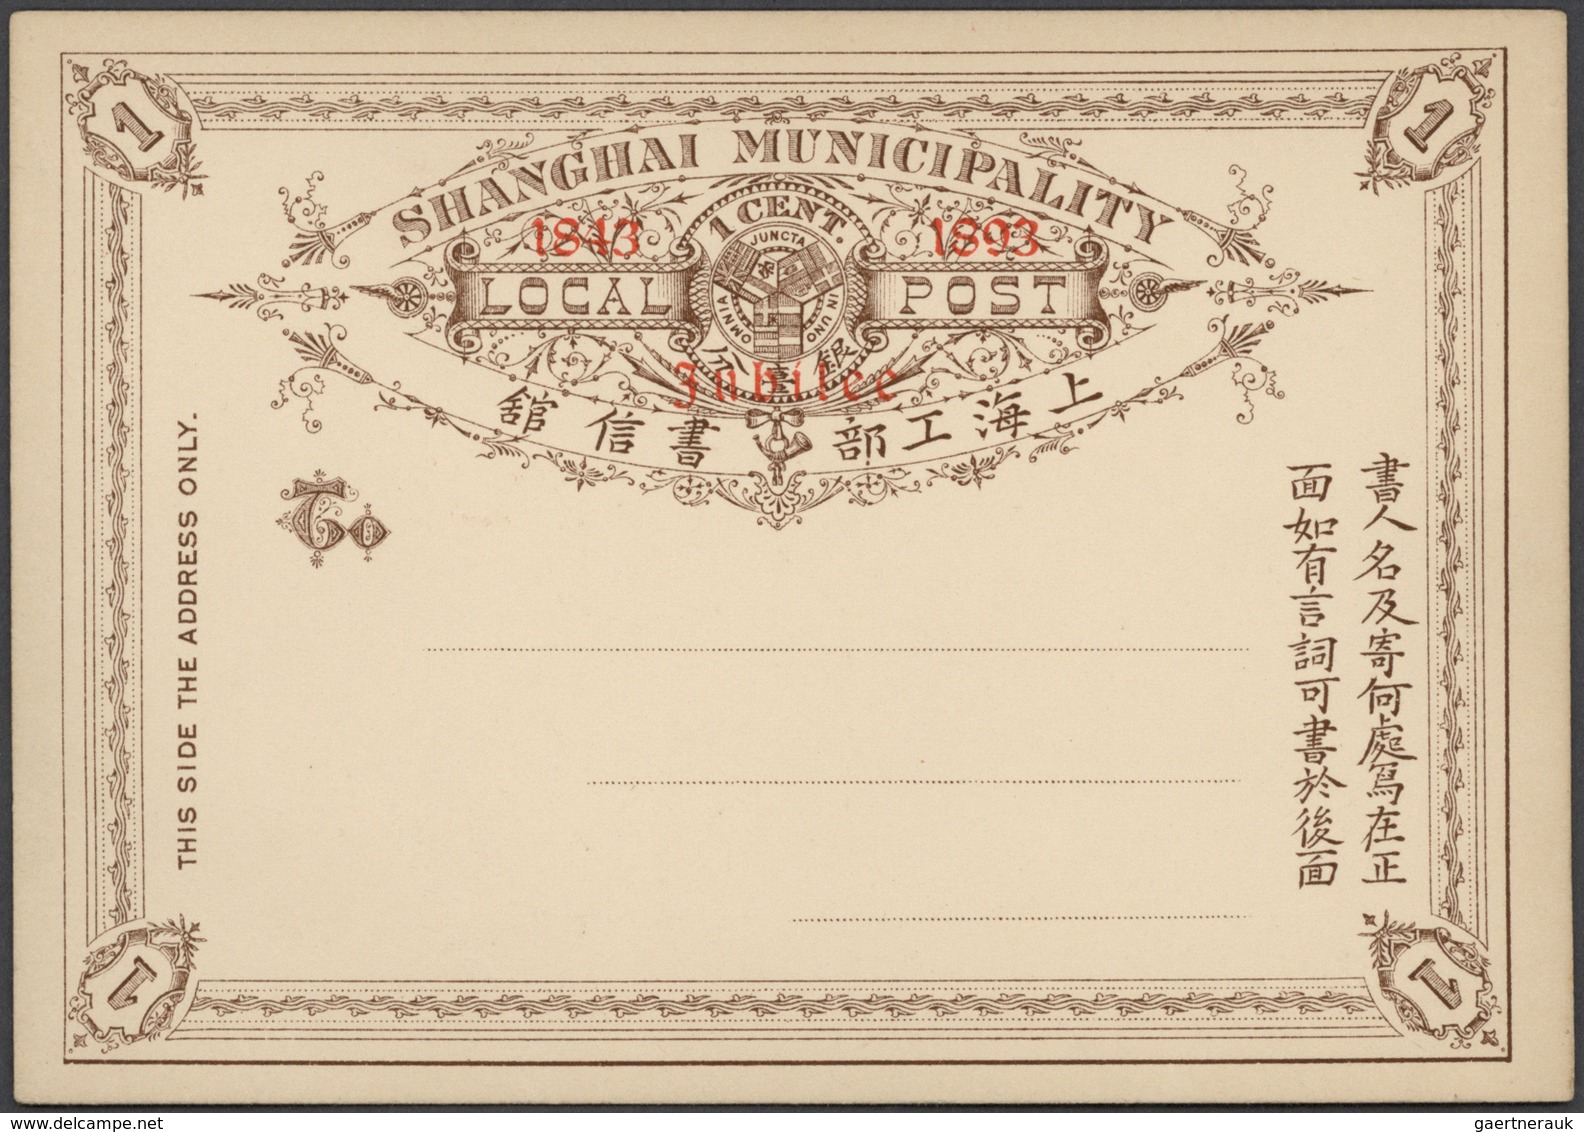 GA China - Ganzsachen: 1886/97 (ca.), Shanghai LPO and Chefoo LPO mint cards, letter cards, wrappers mi